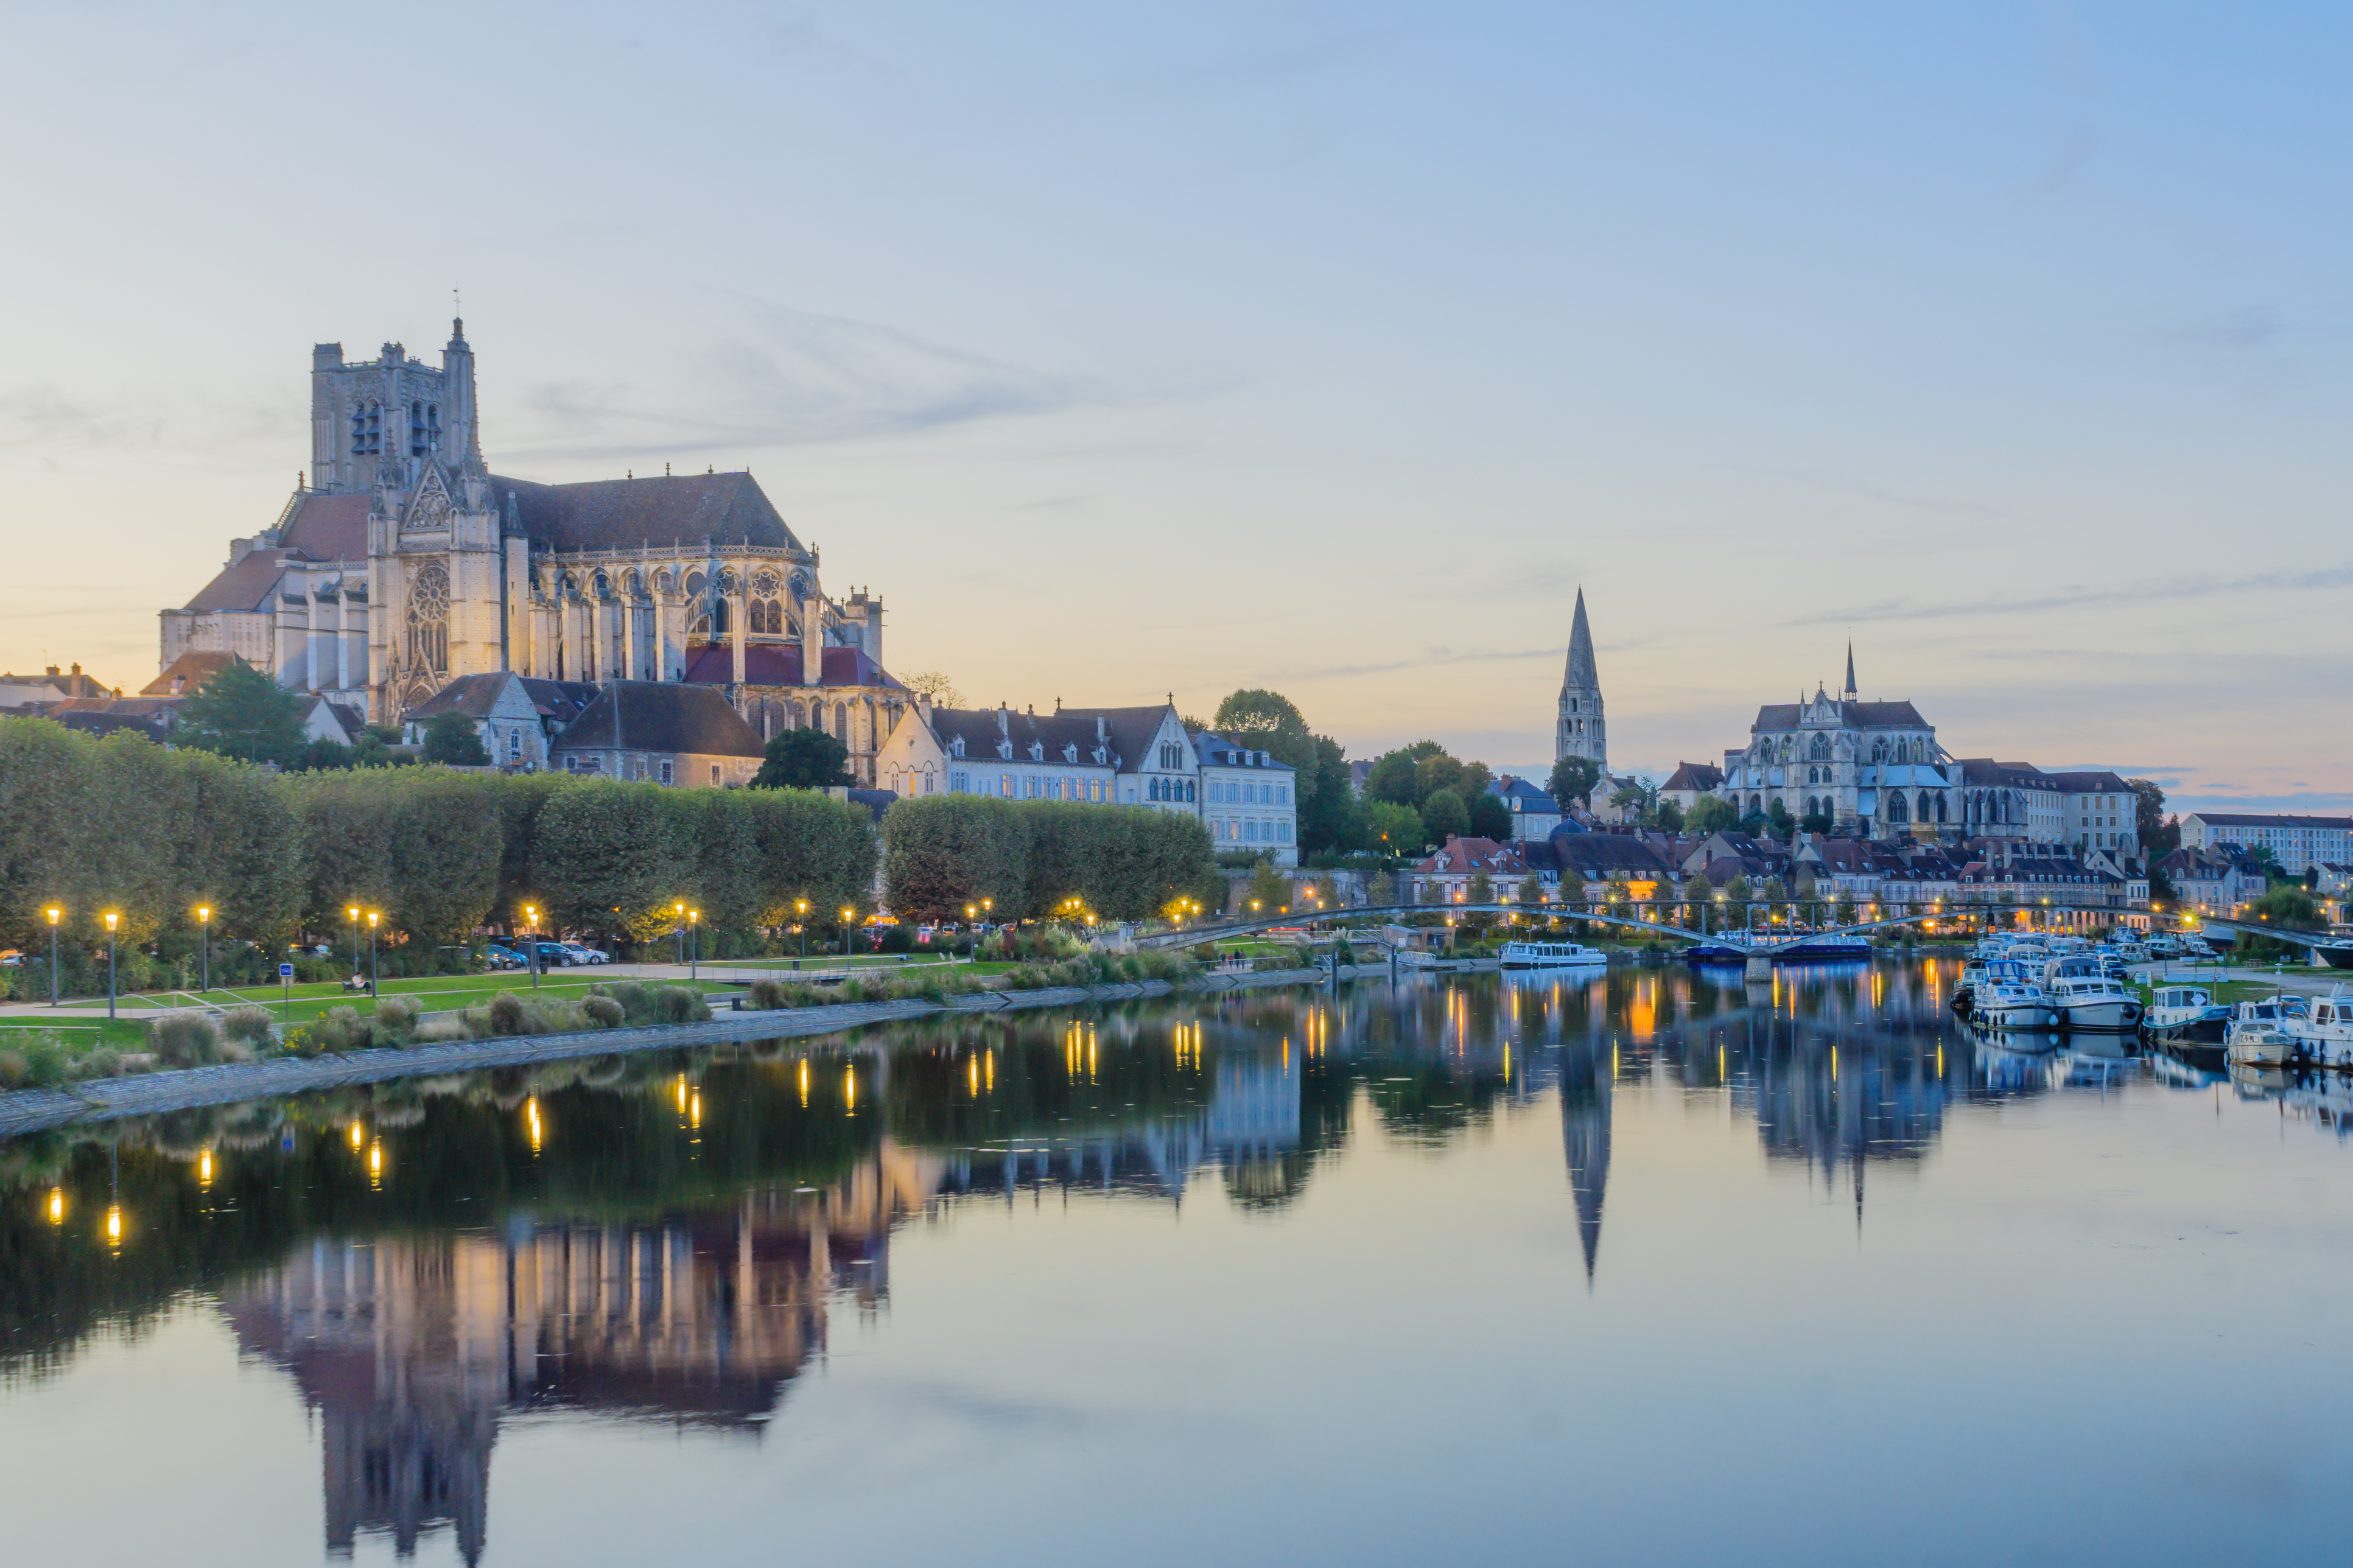 Sunset view of the Yonne River, with boats, the cathedral (Cathedrale Saint-Etienne), the Abbey of Saint-Germain, locals and visitors, in Auxerre, Burgundy, France